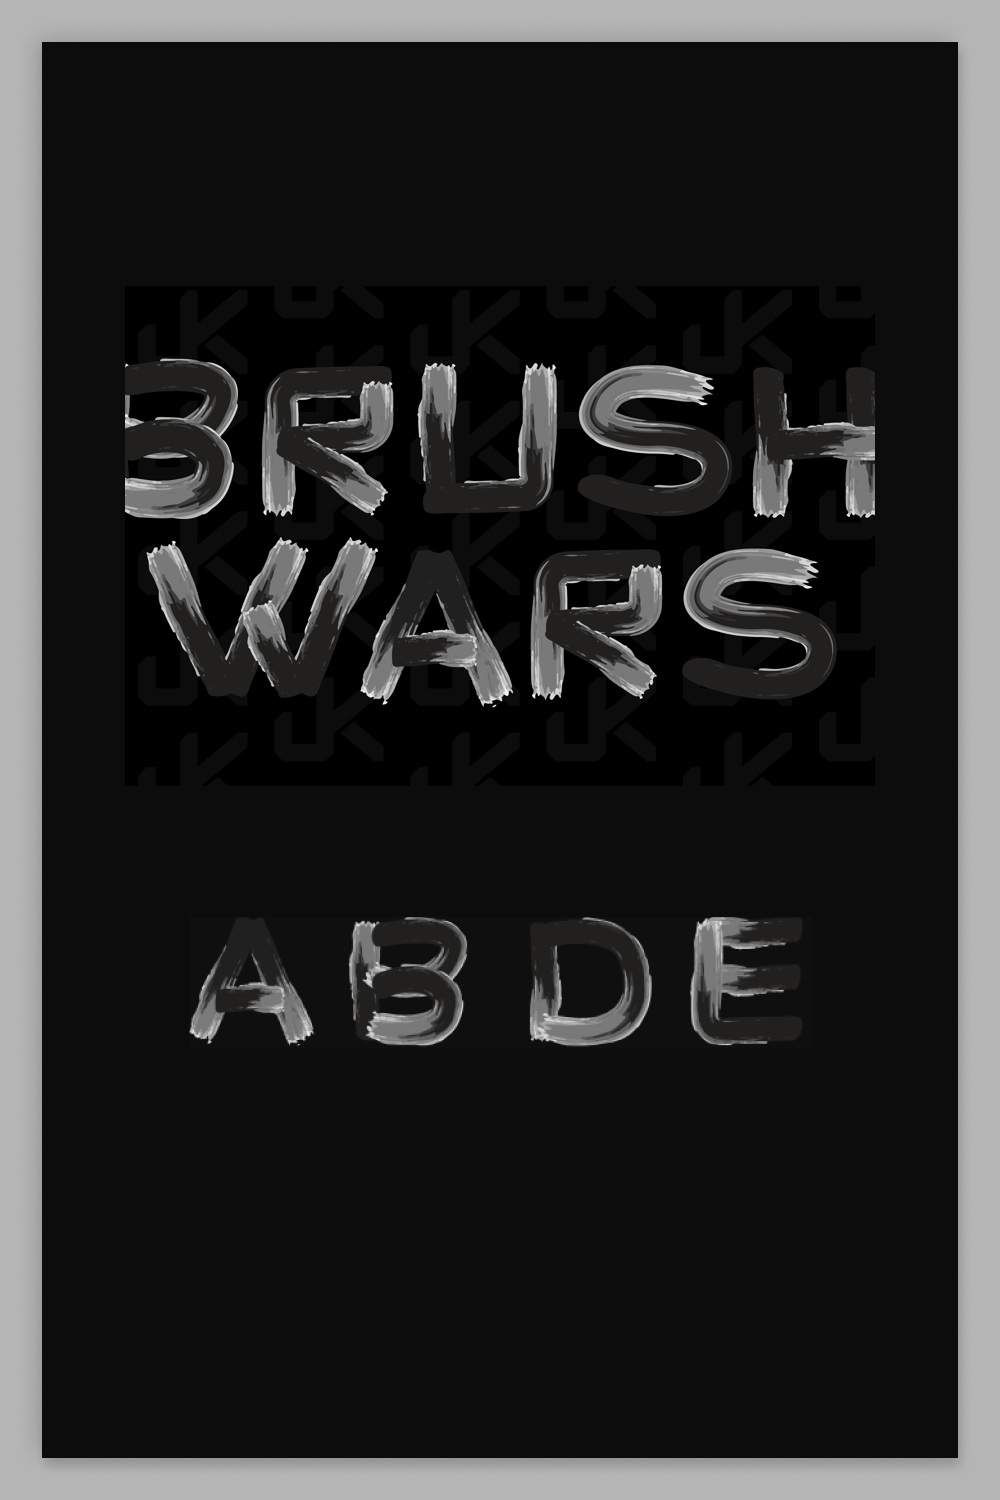 Text Brush Wars written with a brush in gray on a black background.